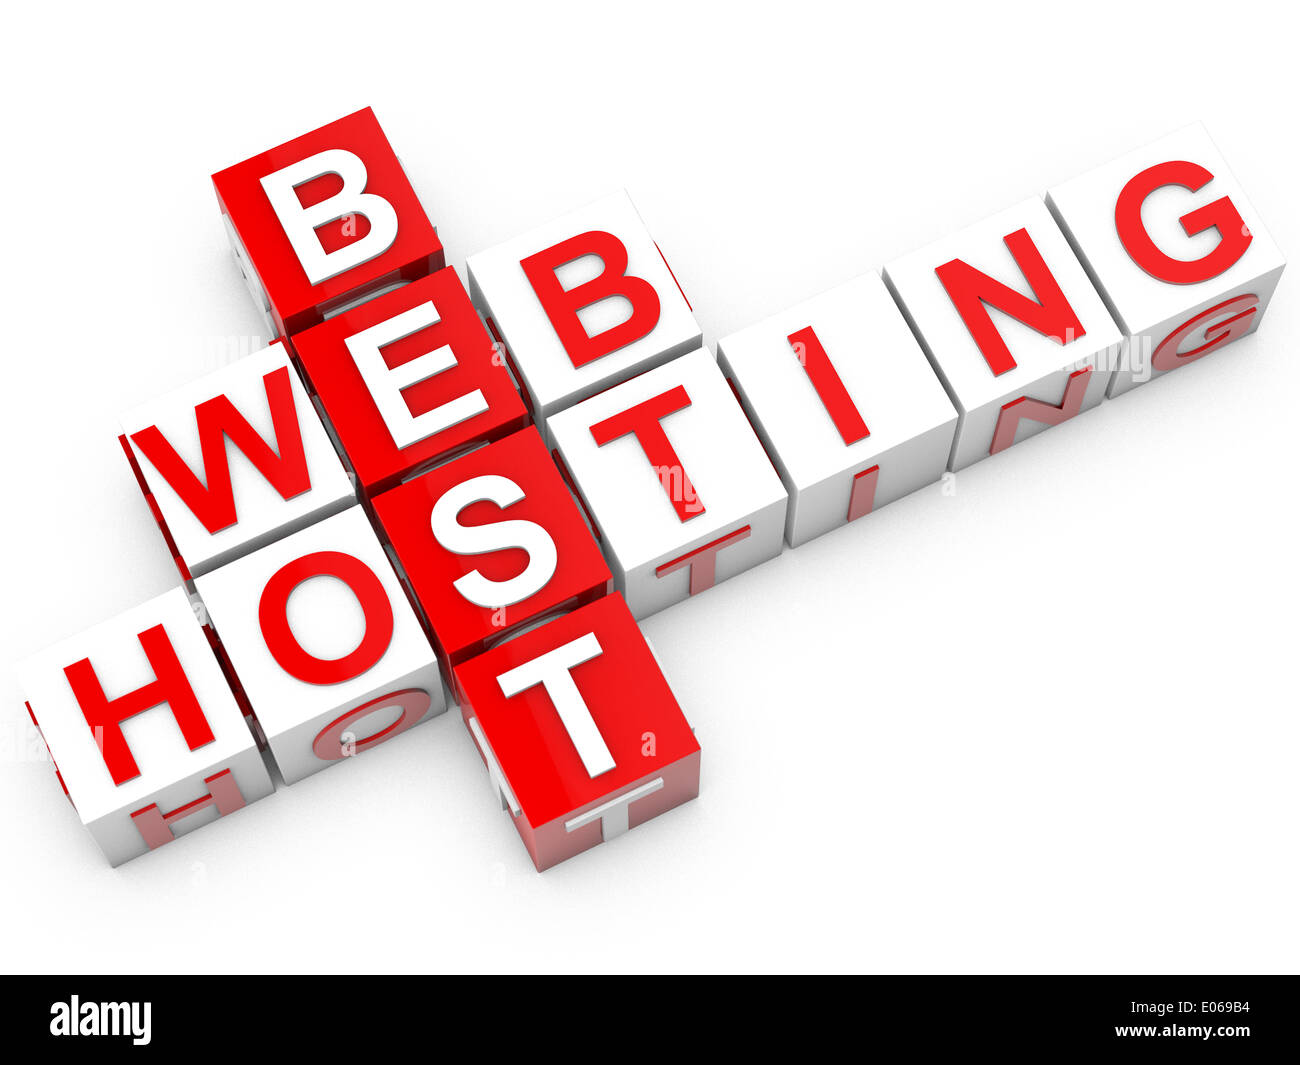 Best Web Hosting cubes over white background Stock Photo